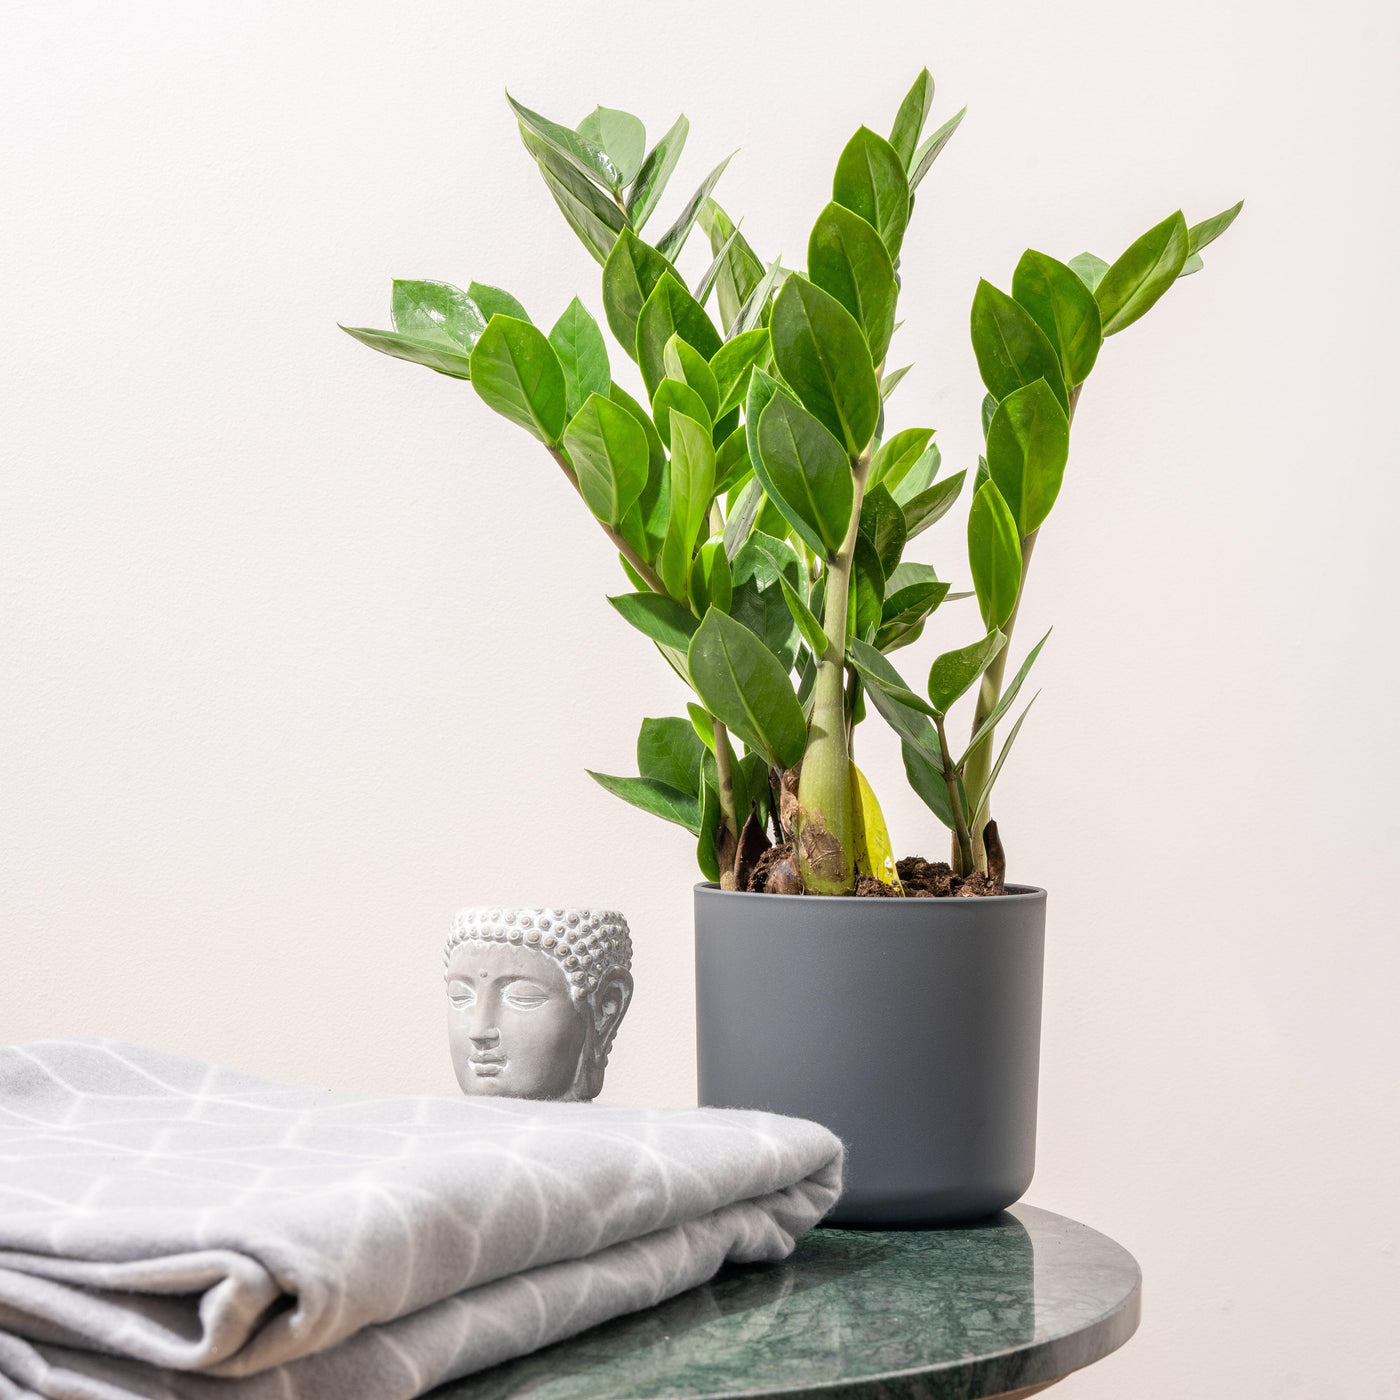 Ten Productivity Boosting Houseplants for your Home Office - House of Kojo